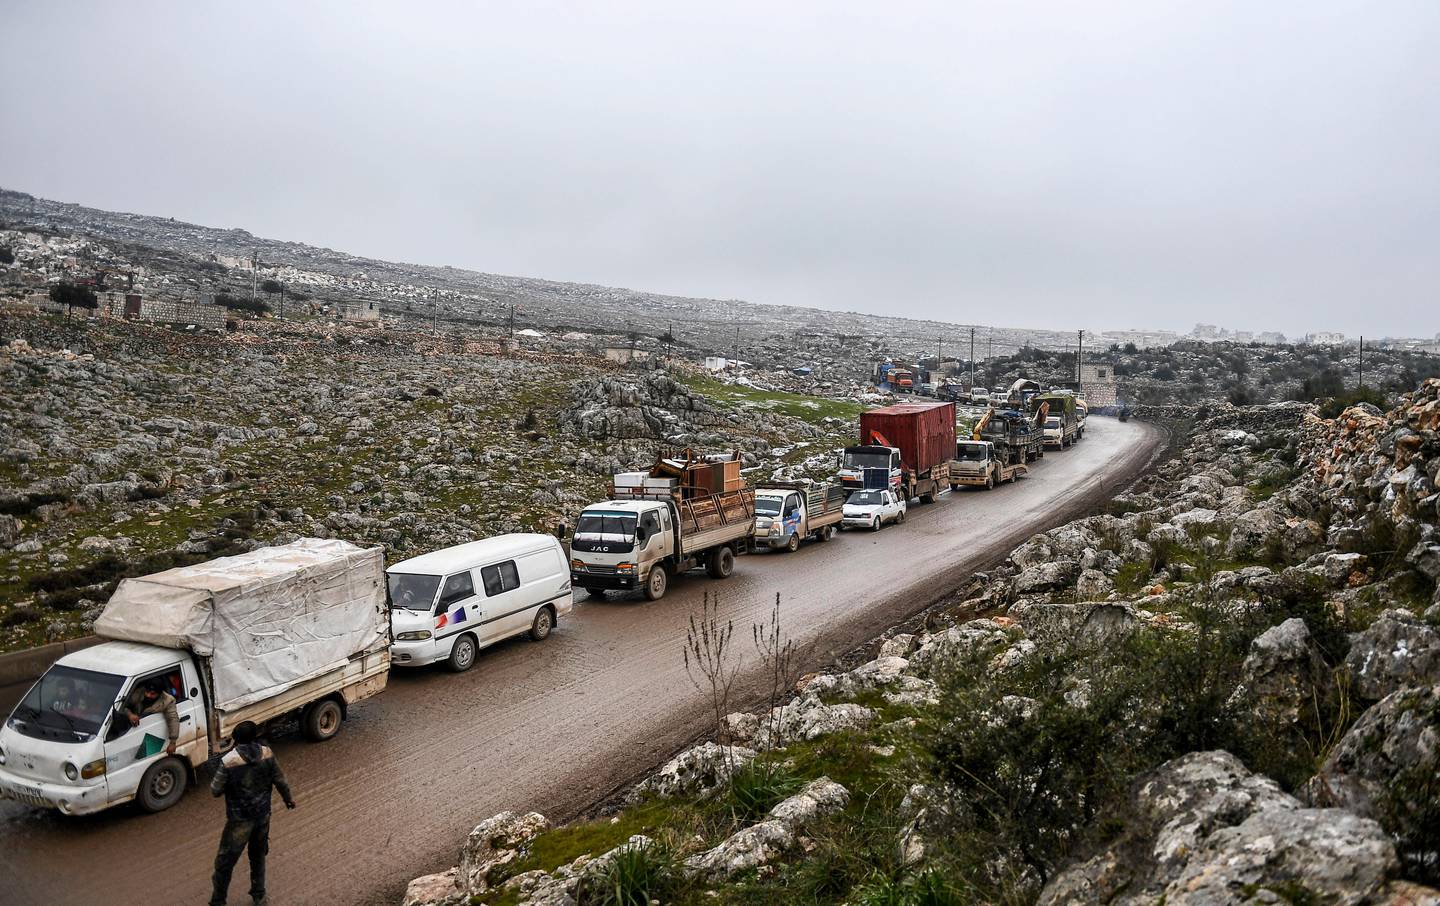 Syrian civilians flee from Idlib in rain toward the north to find safety inside Syria near the border with Turkey, Thursday, Feb. 13, 2020. Syrian troops are waging an offensive in the last rebel stronghold according to news reports by a Turkish news agency.( AP Photo)